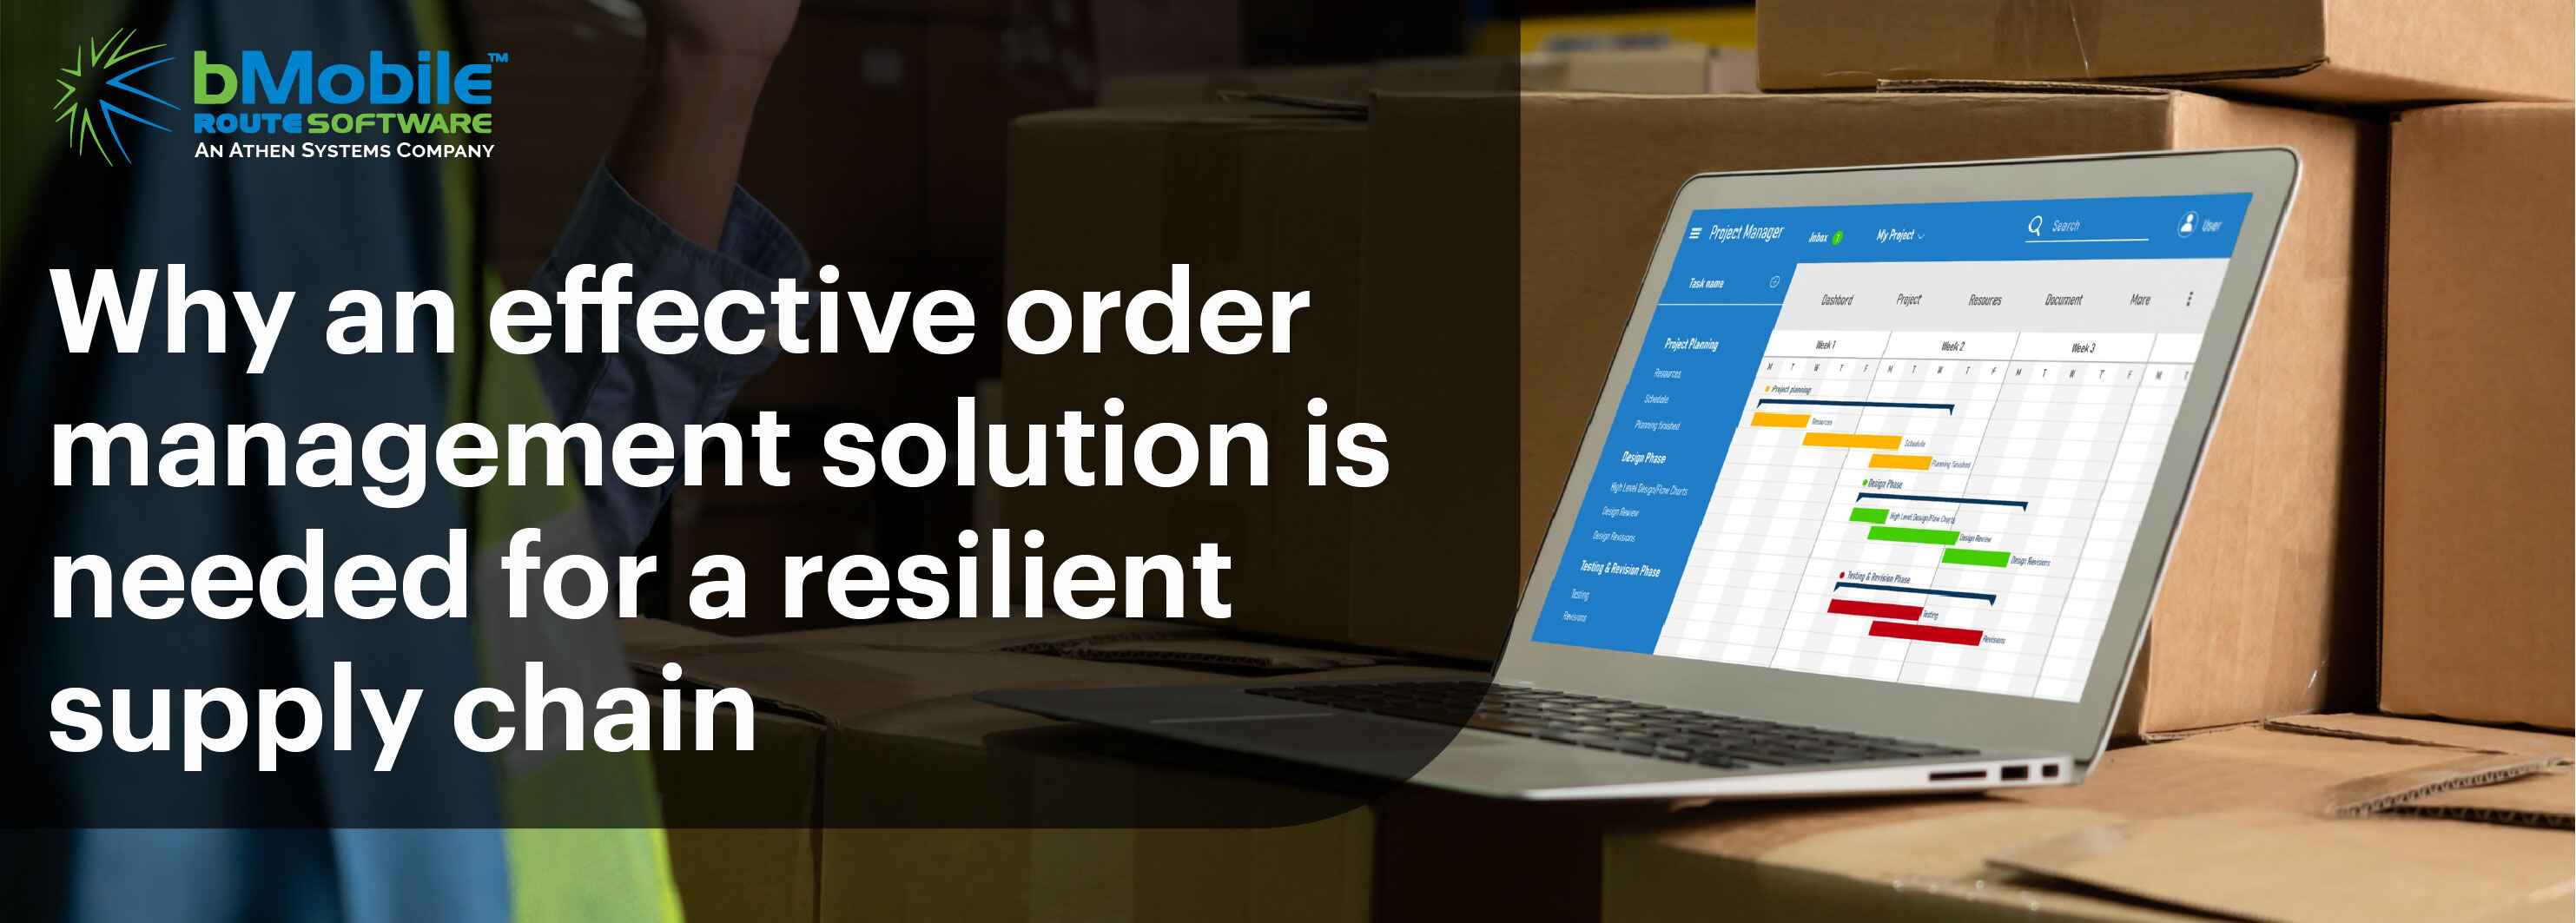 Why an effective order management solution is needed for a resilient supply chain